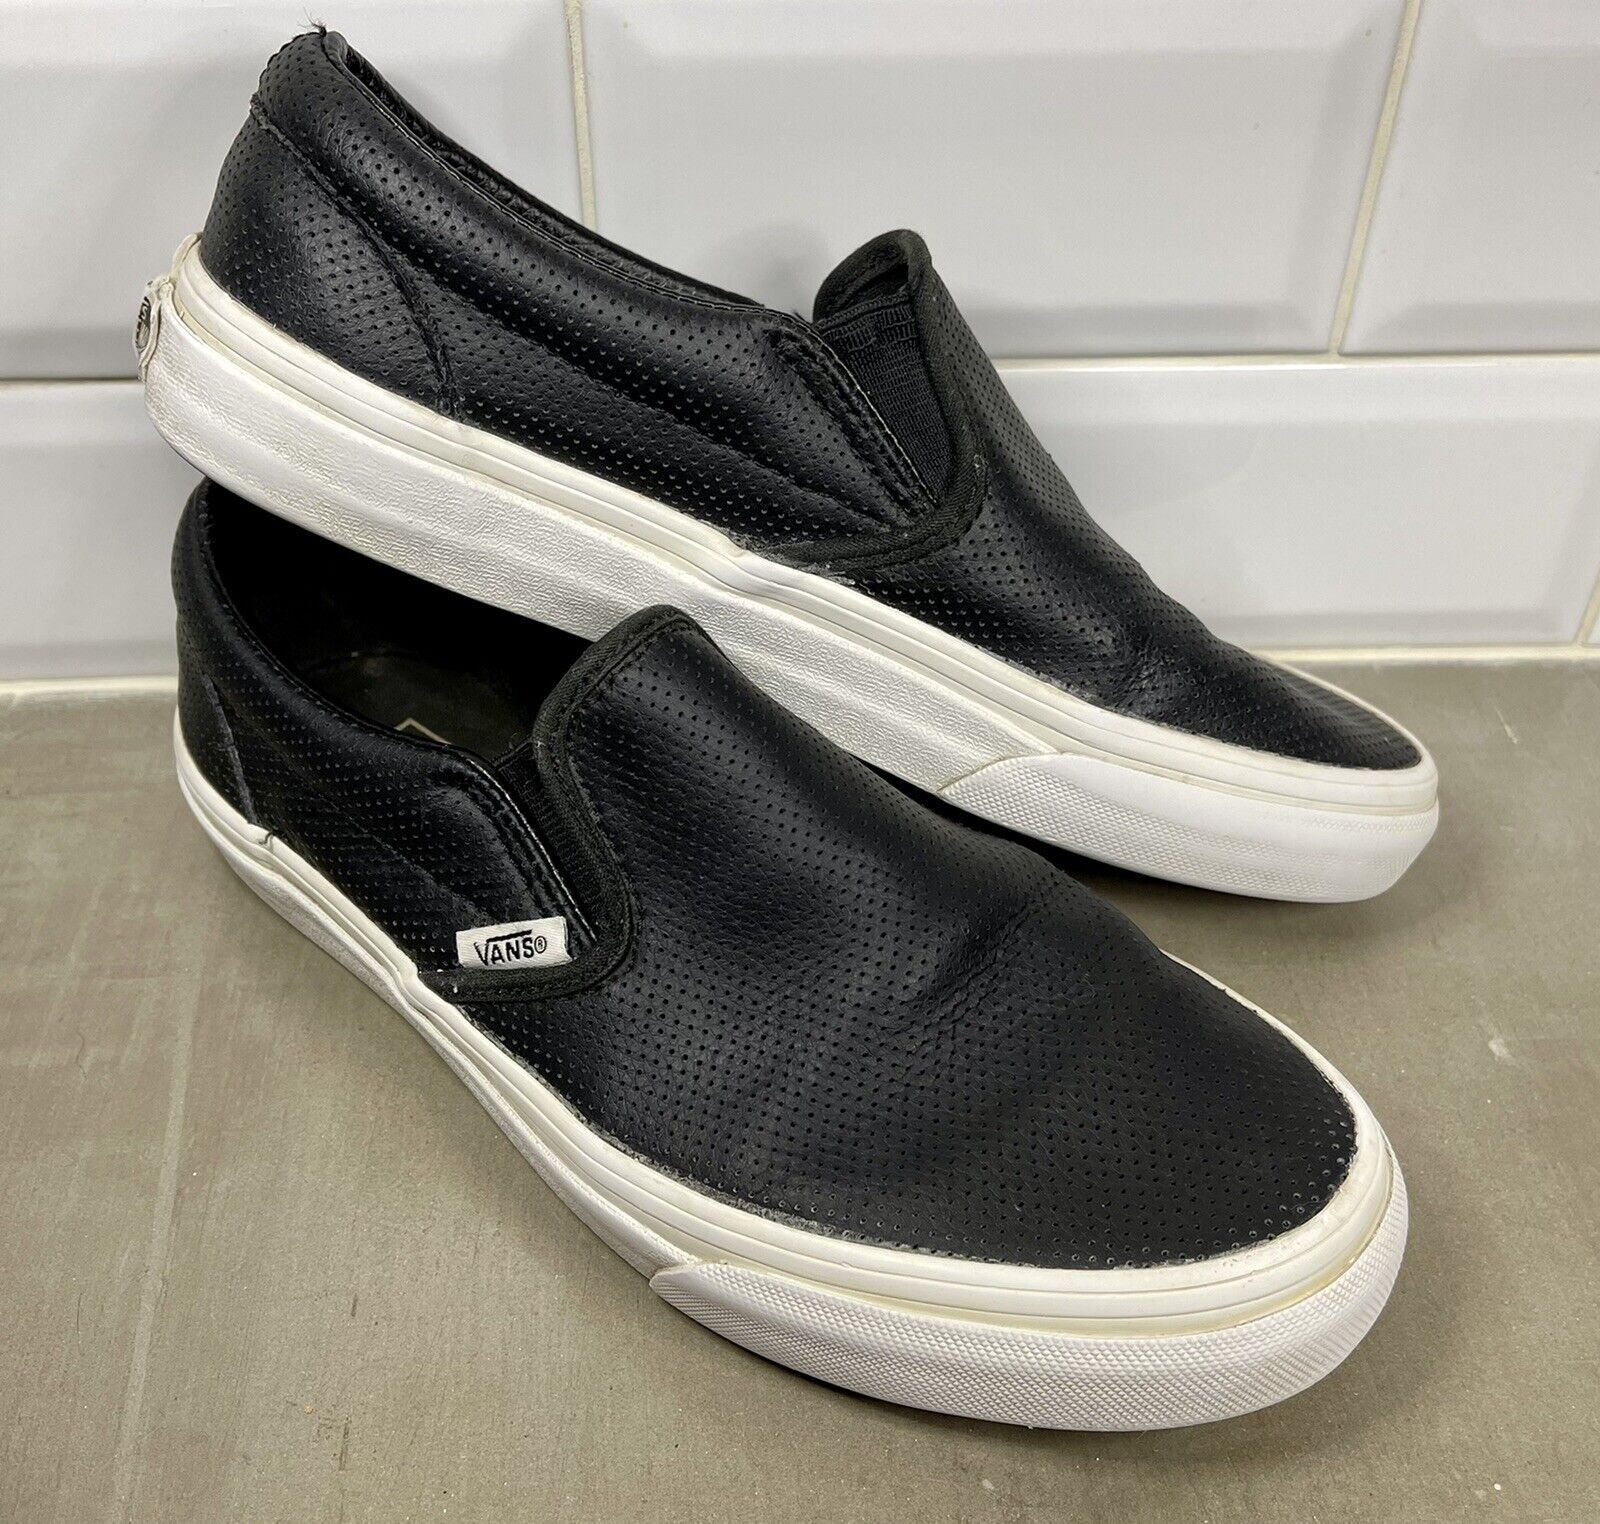 Vans Perforated Leather Slip On Shoes Black Mens 5.5 Womens 7 (23.5 cm)